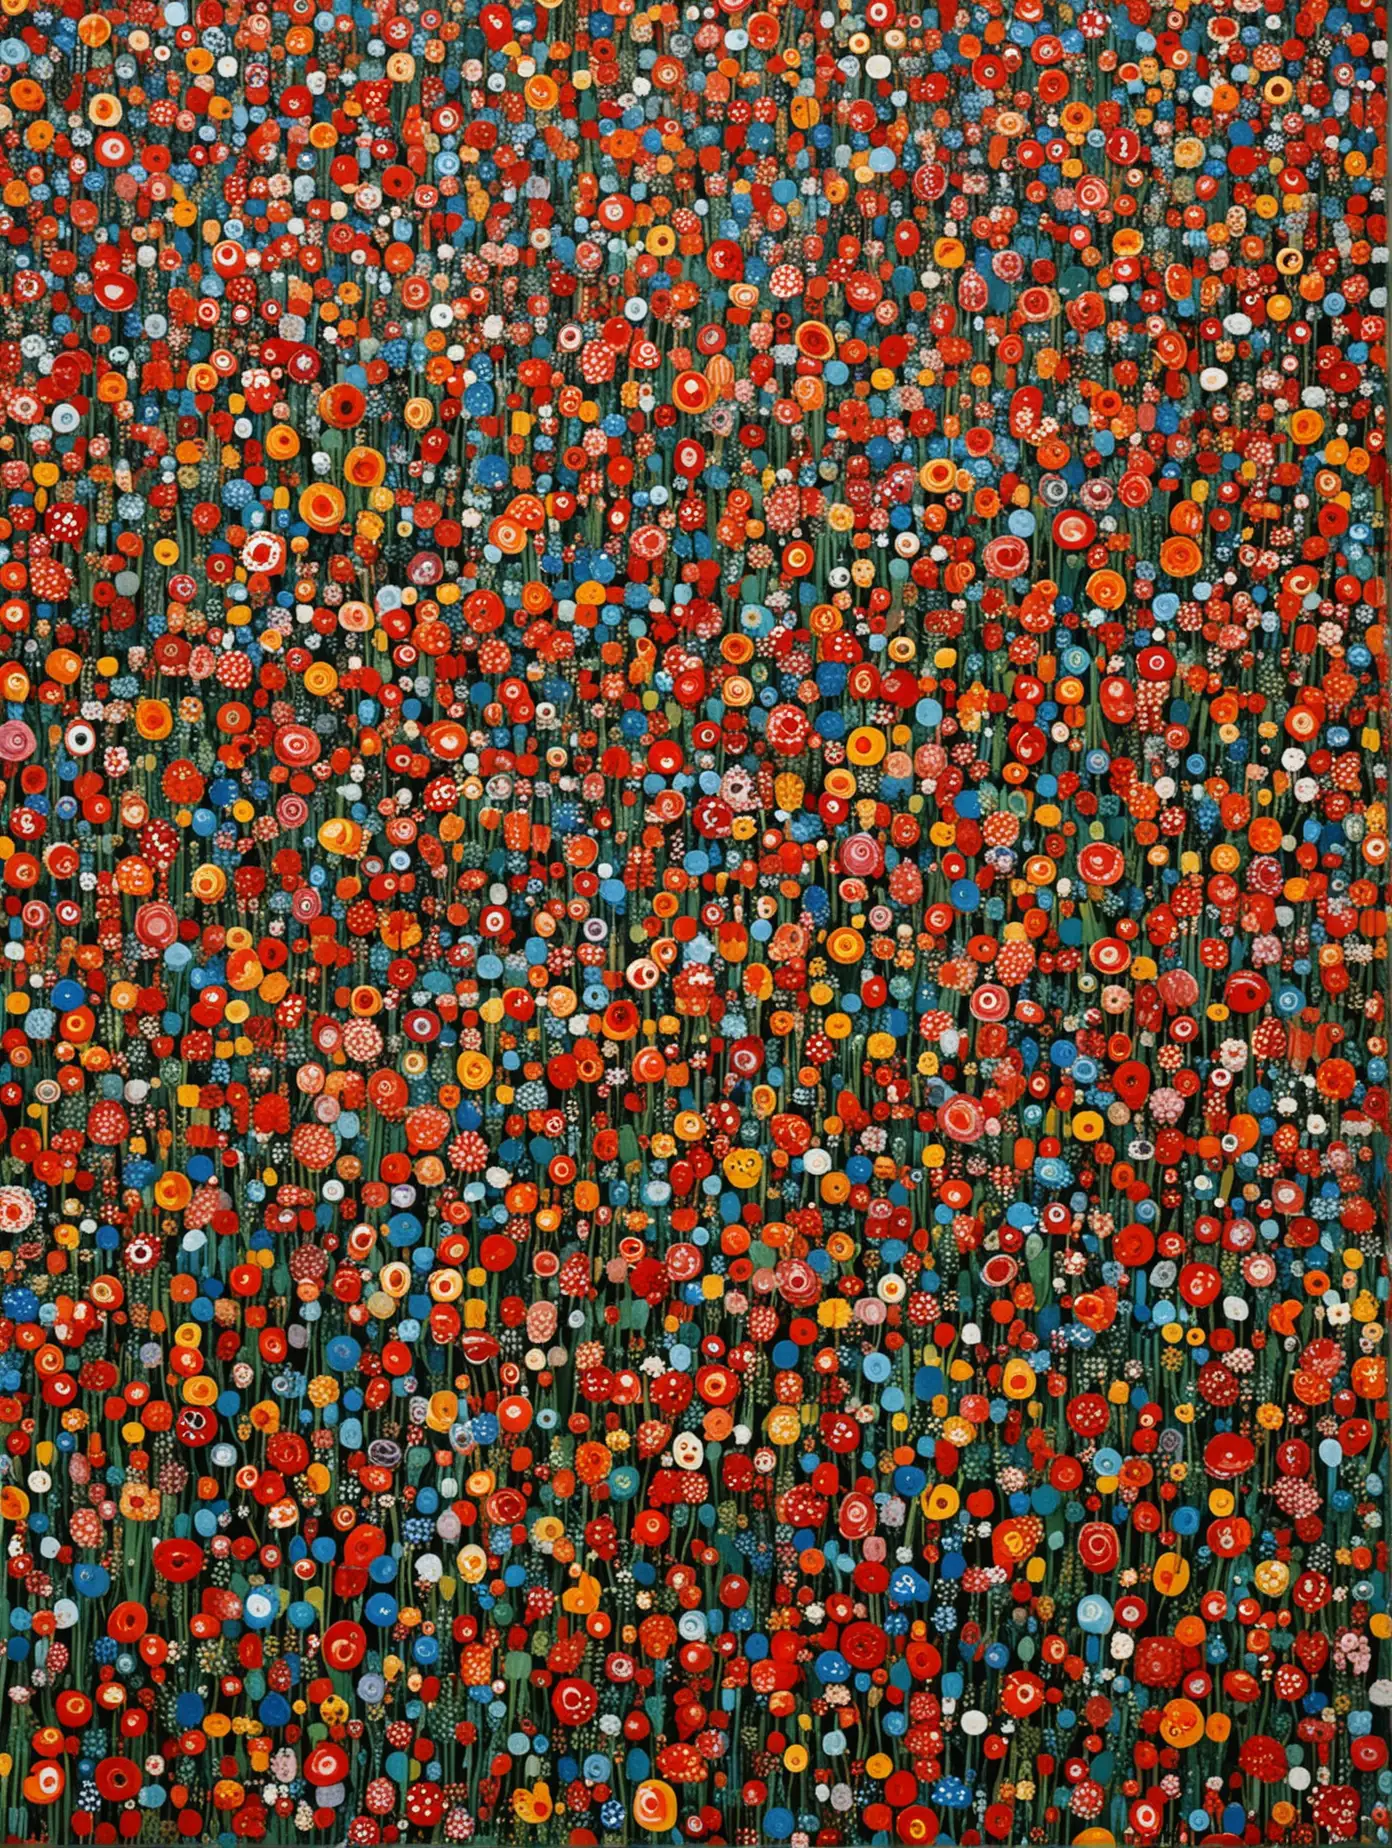 Colorful-Field-Flowers-Abstraction-in-Yayoi-Kusama-Style